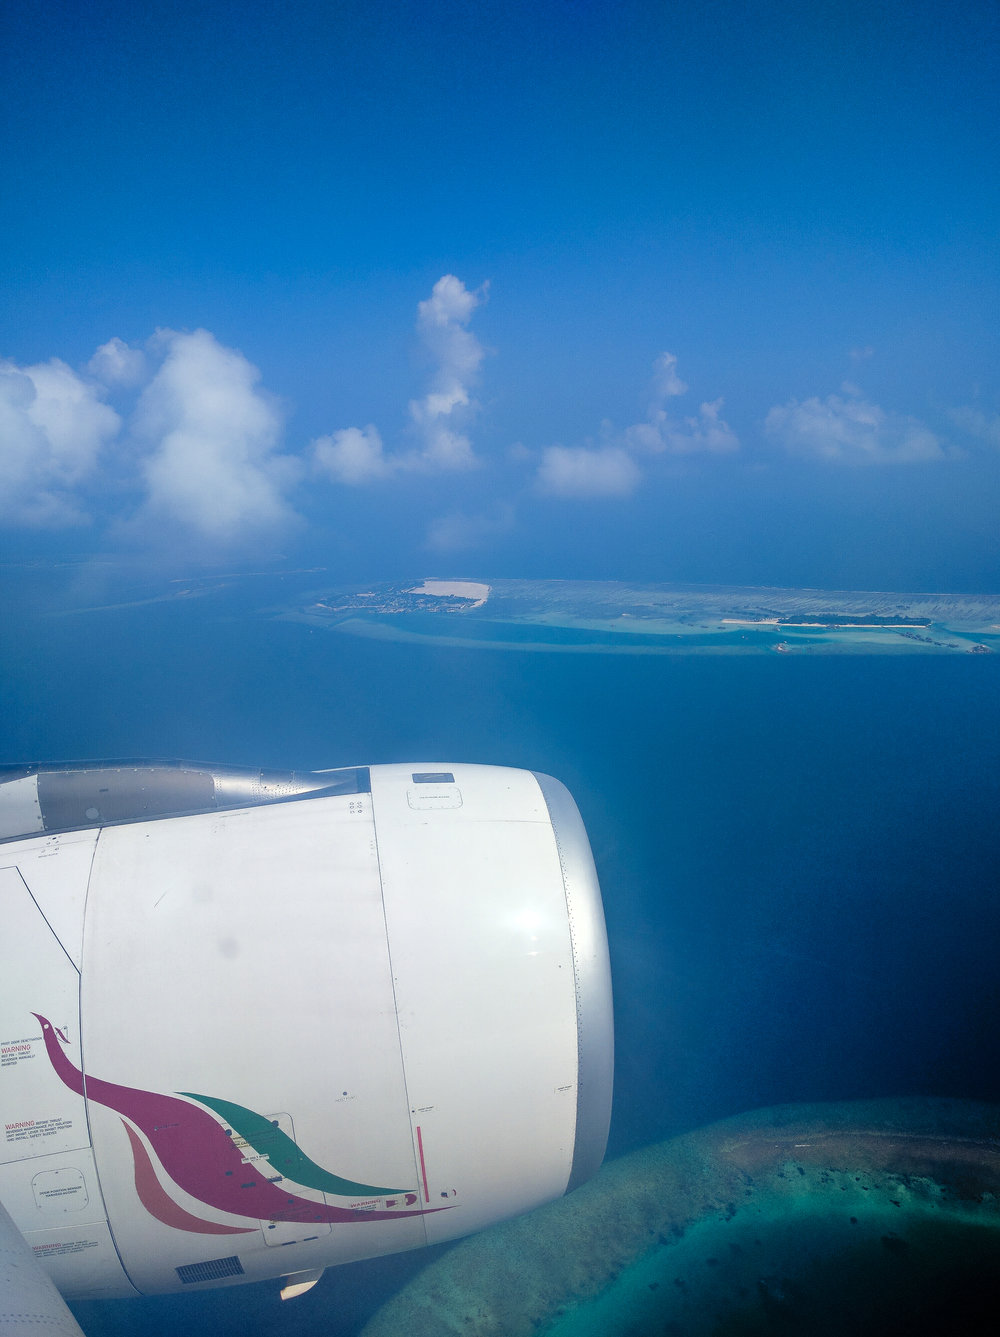  A pic from our decent into the Maldives. All of the islands were unique shapes and beautiful. Taken in 2016  